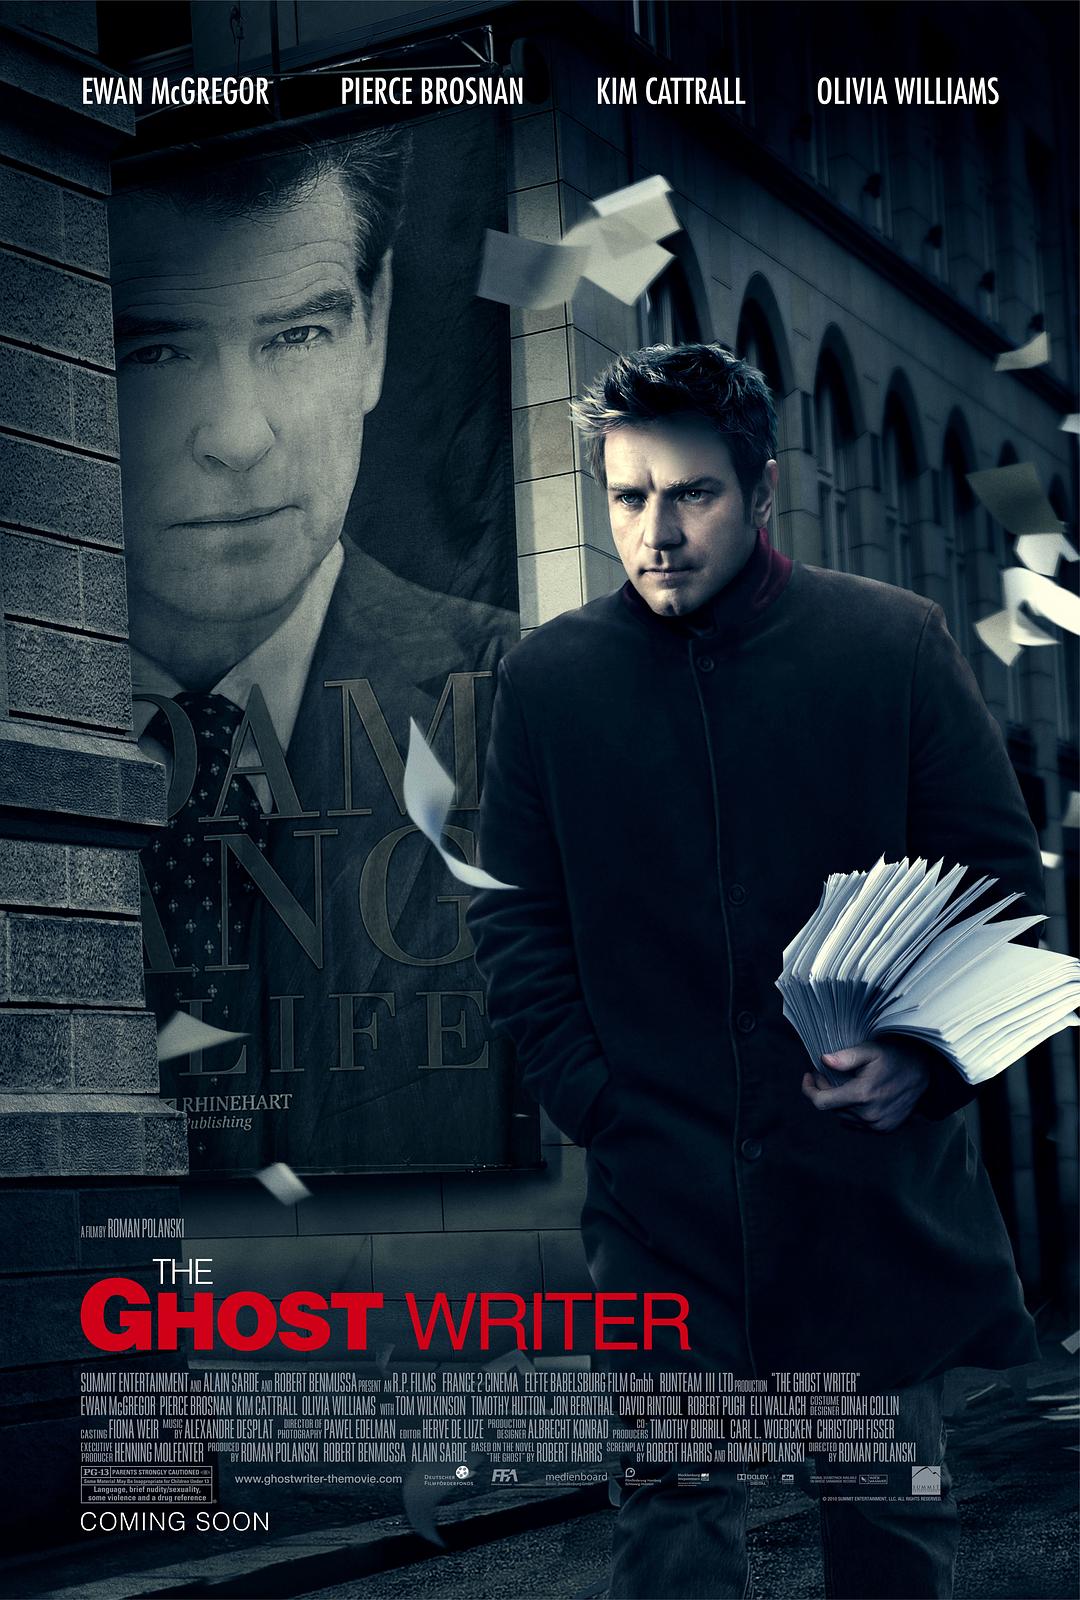 Ӱд/ The.Ghost.Writer.2010.1080p.BluRay.X264-AMIABLE 8.75GB-1.png